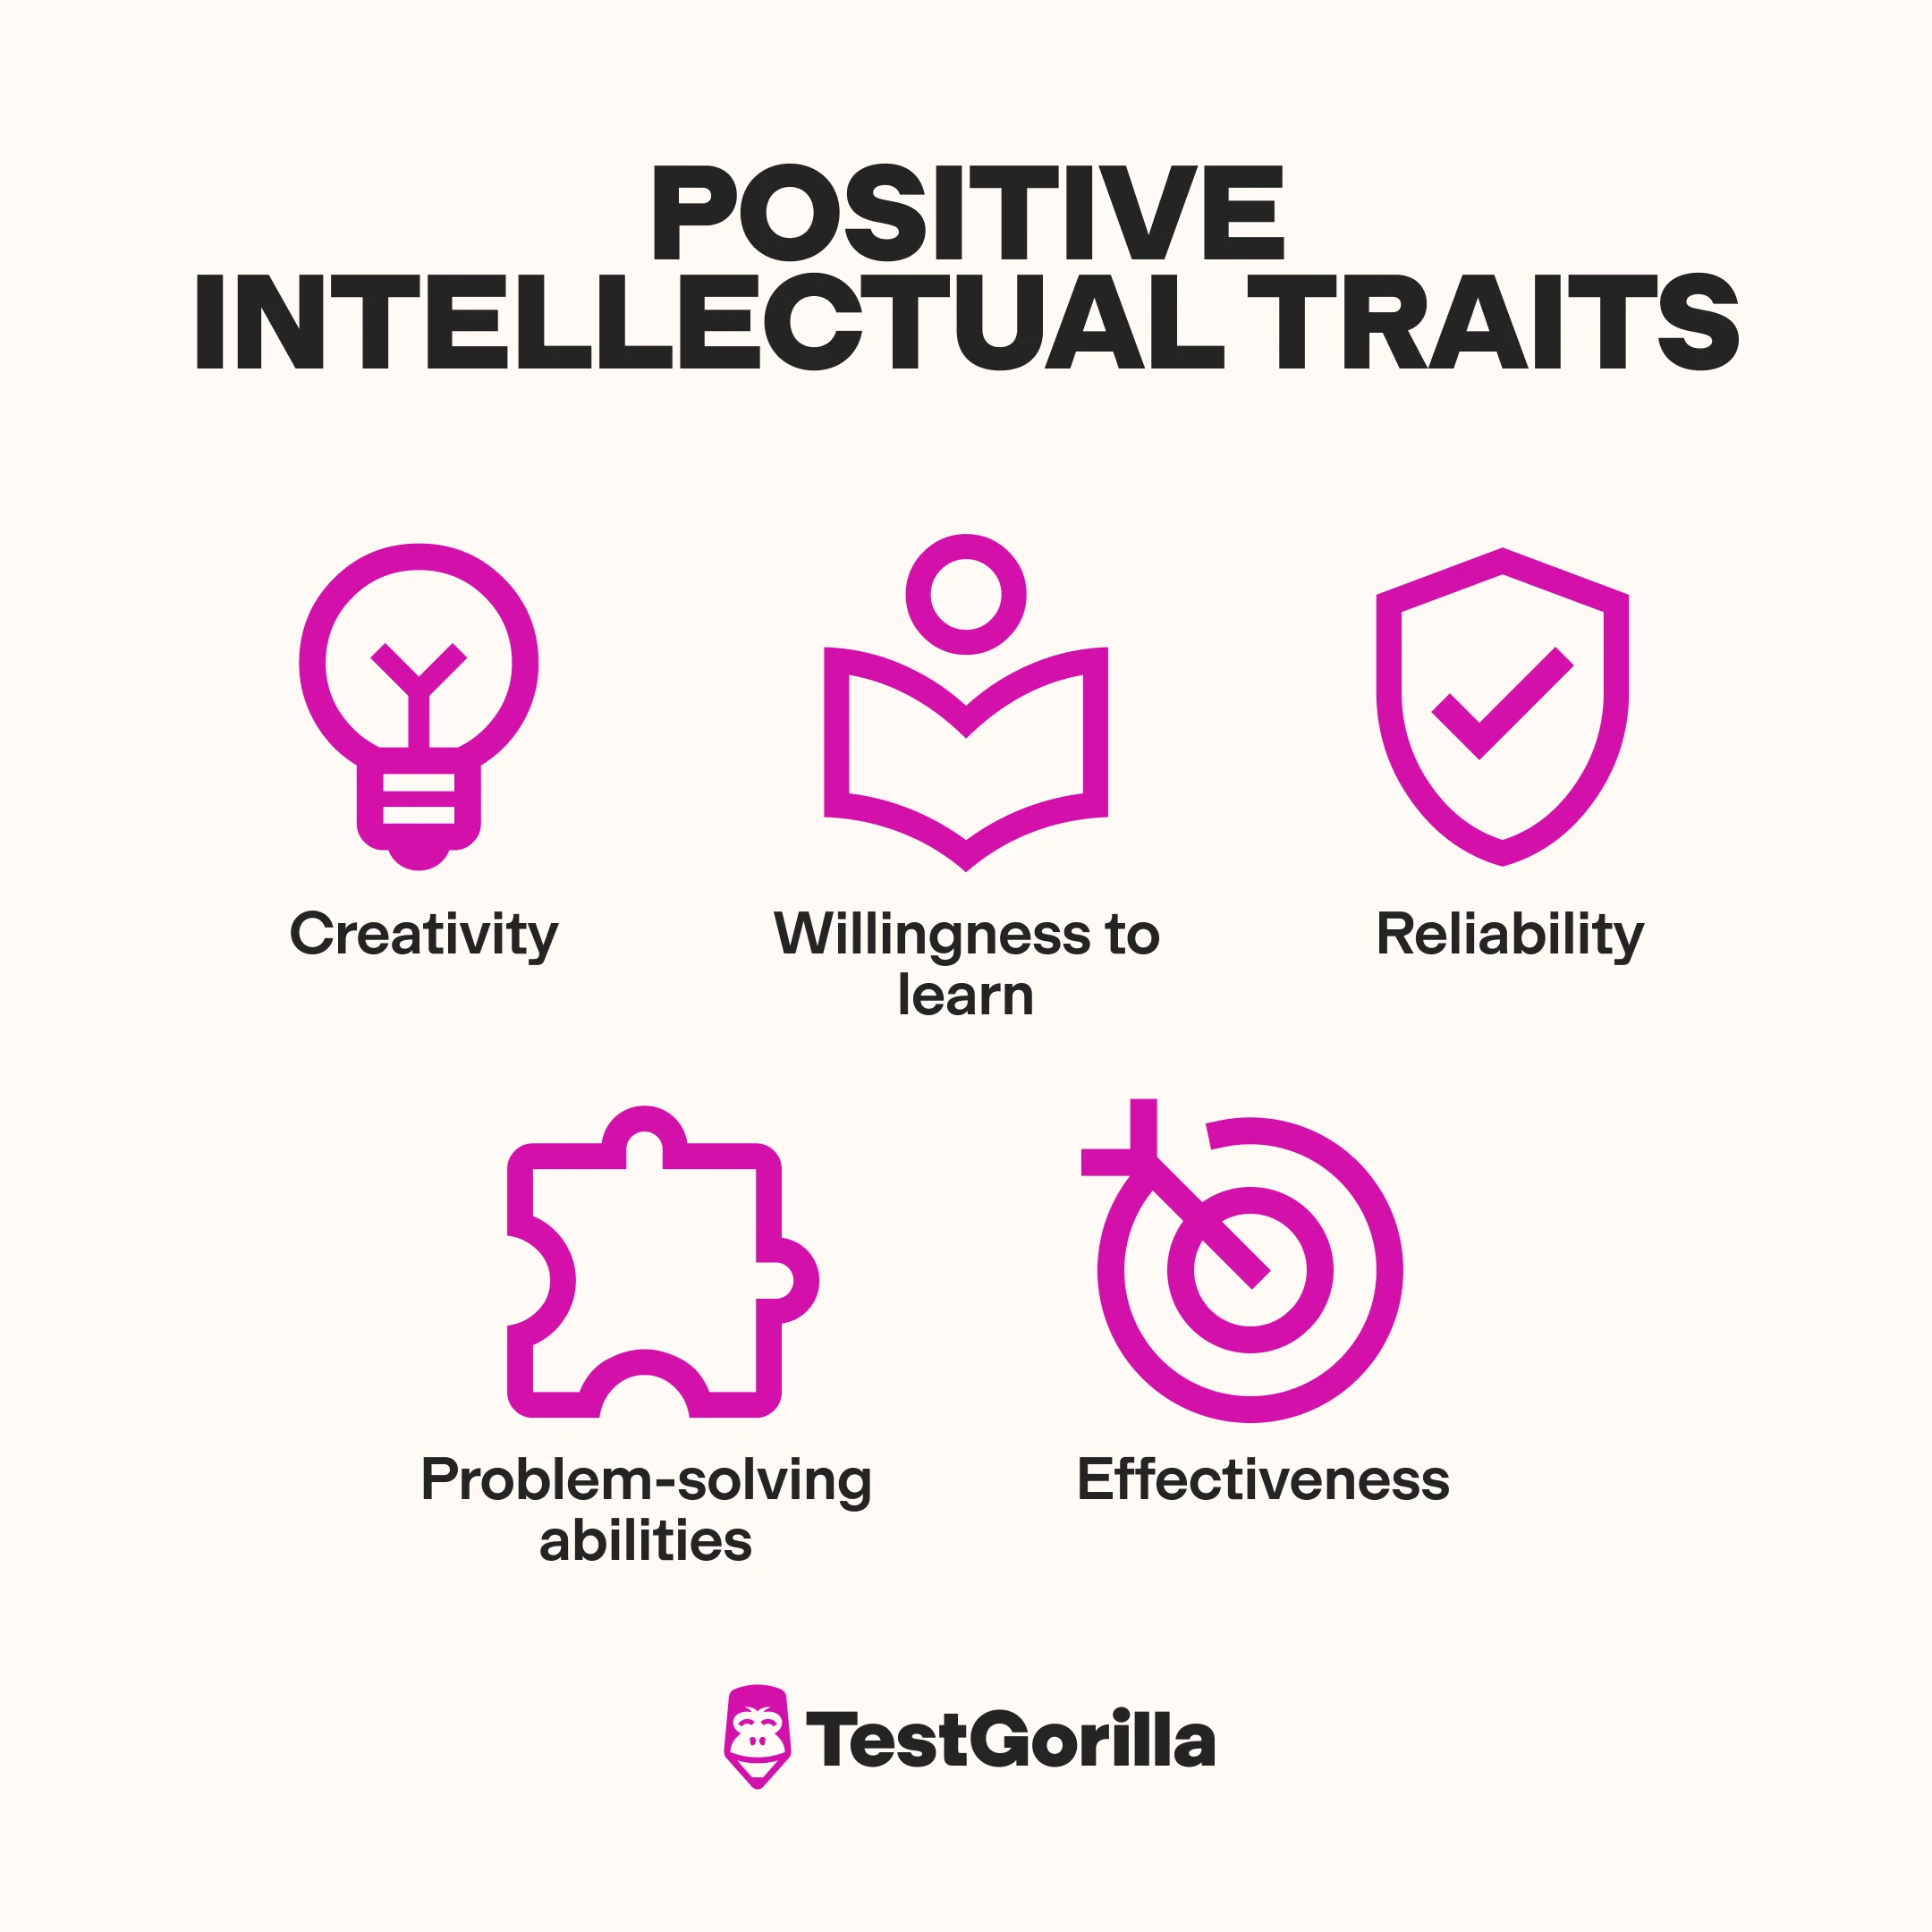 illustrated list of positive intellectual traits in the workplace